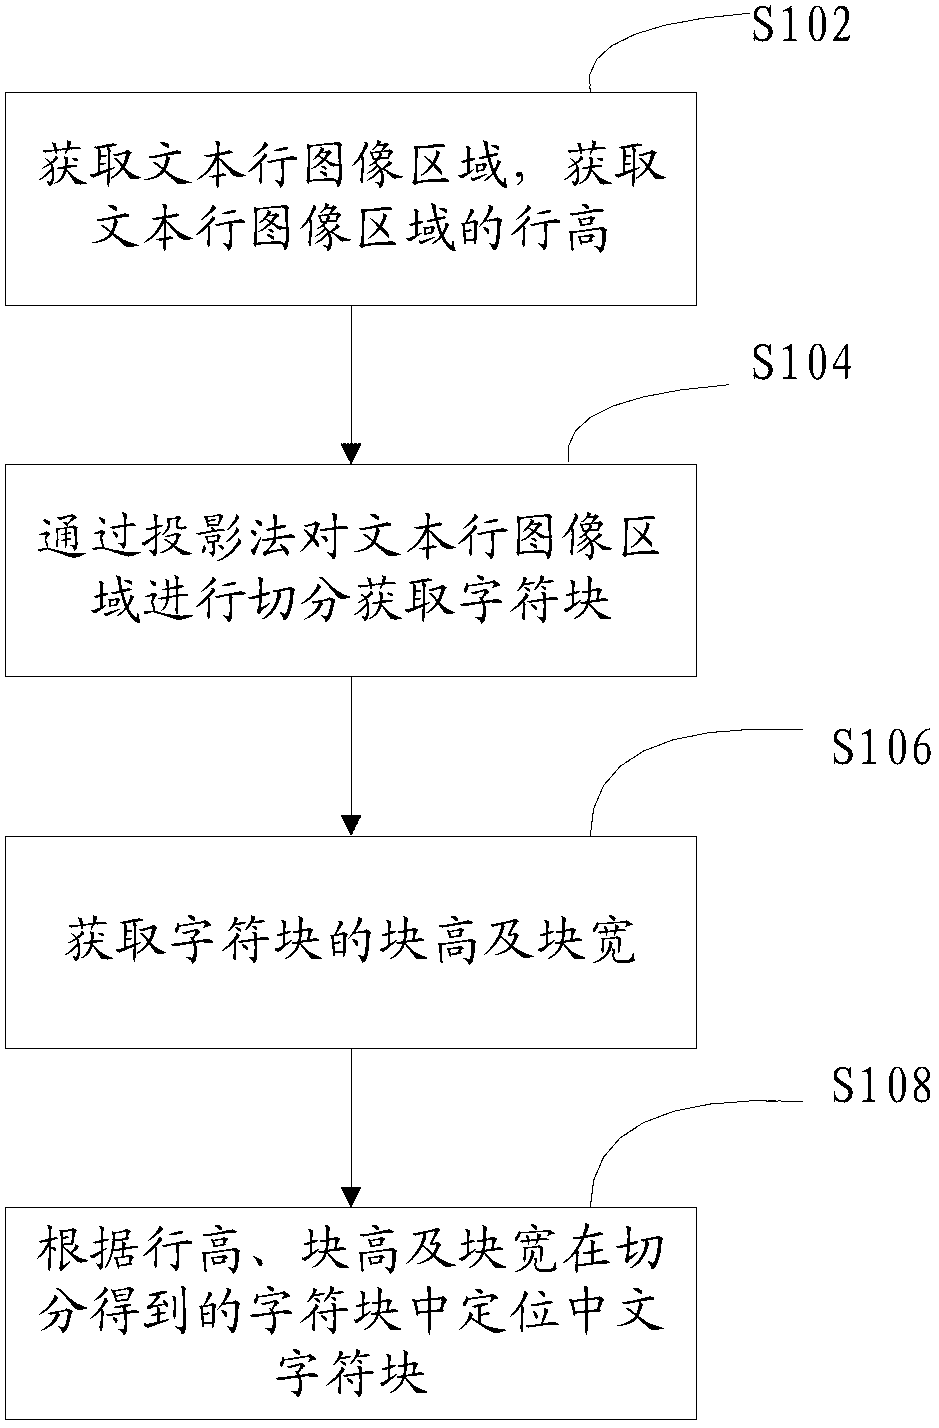 Method and device for segmenting Chinese and English mixed typeset character images